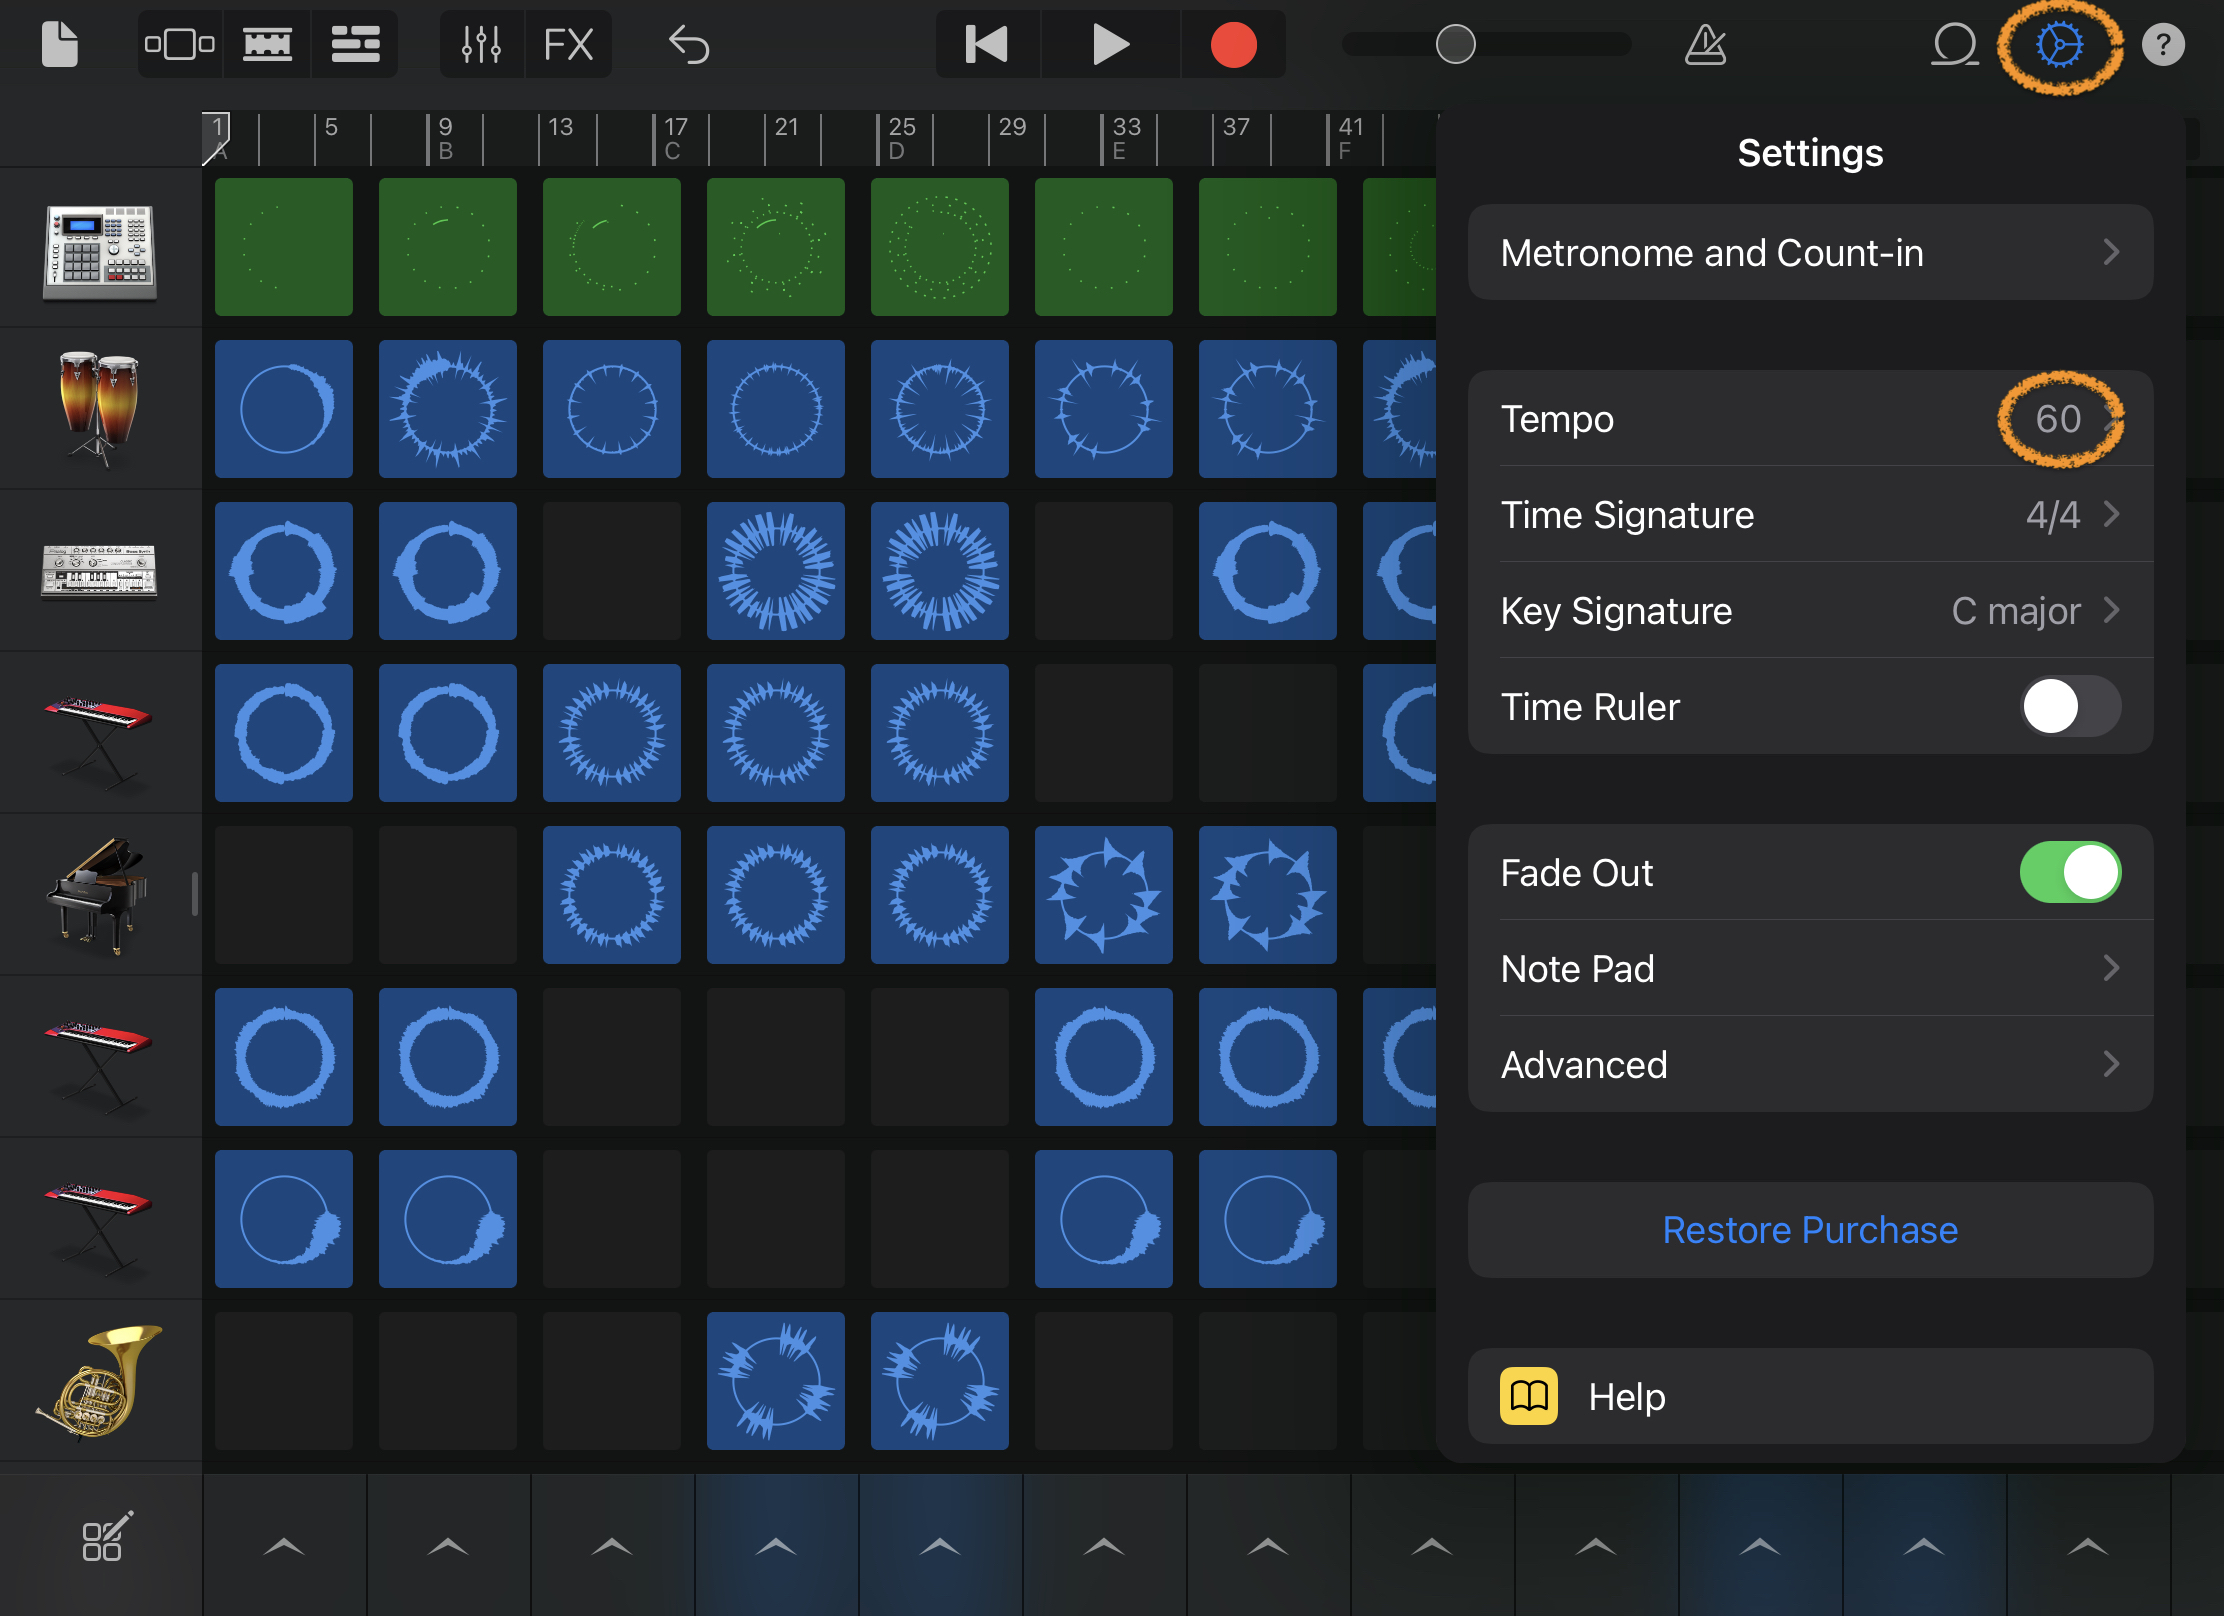 iPad GarageBand Live Loops view with Settings and Tempo 60 beats per minute circled